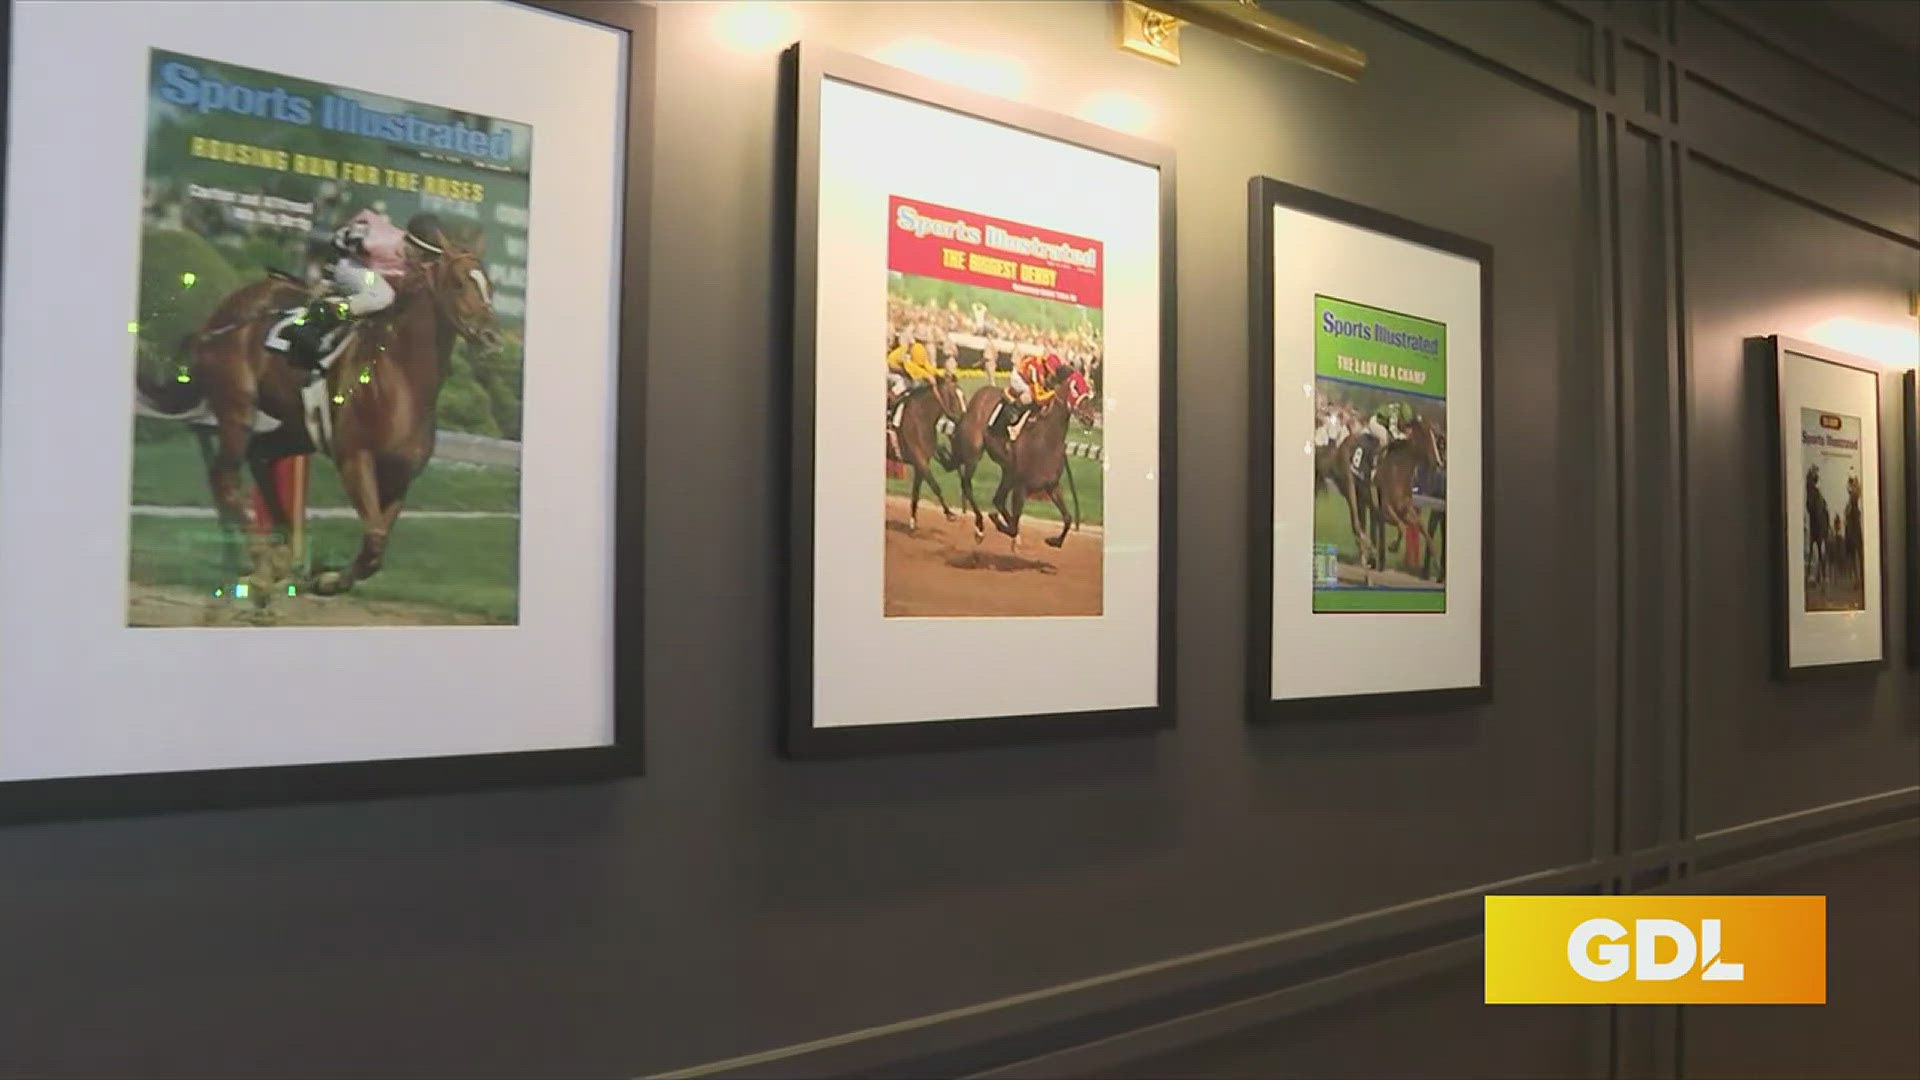 Club S.I. is a luxury space that features sports illustrated covers of Kentucky Derby Winners.